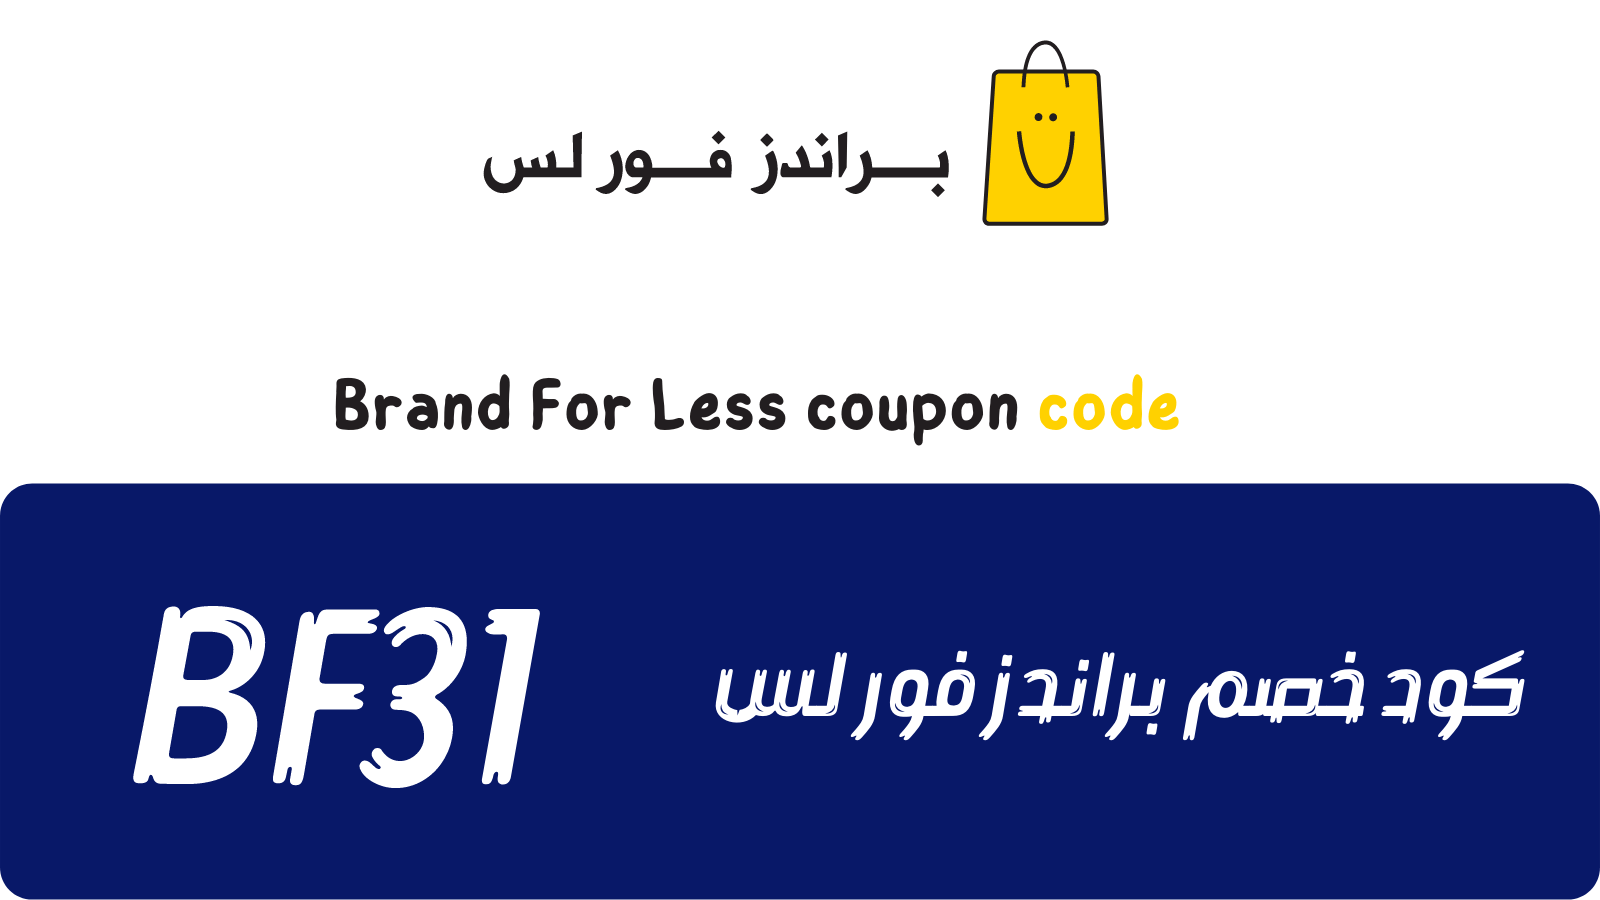 Brand For Less Coupon Code 